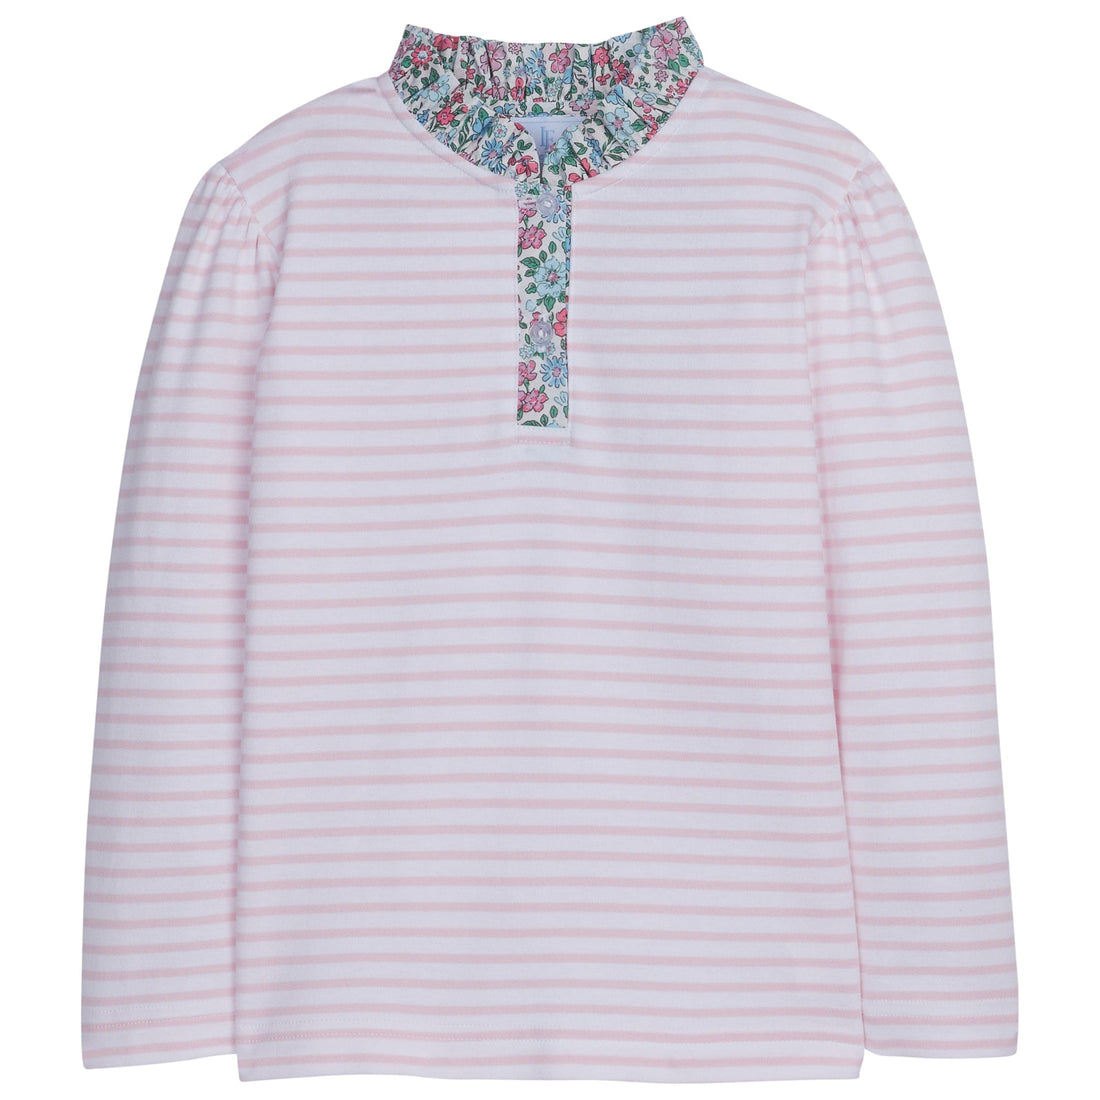 little english classic childrens clothing girls pink and white striped shirt with pink and blue floral collar